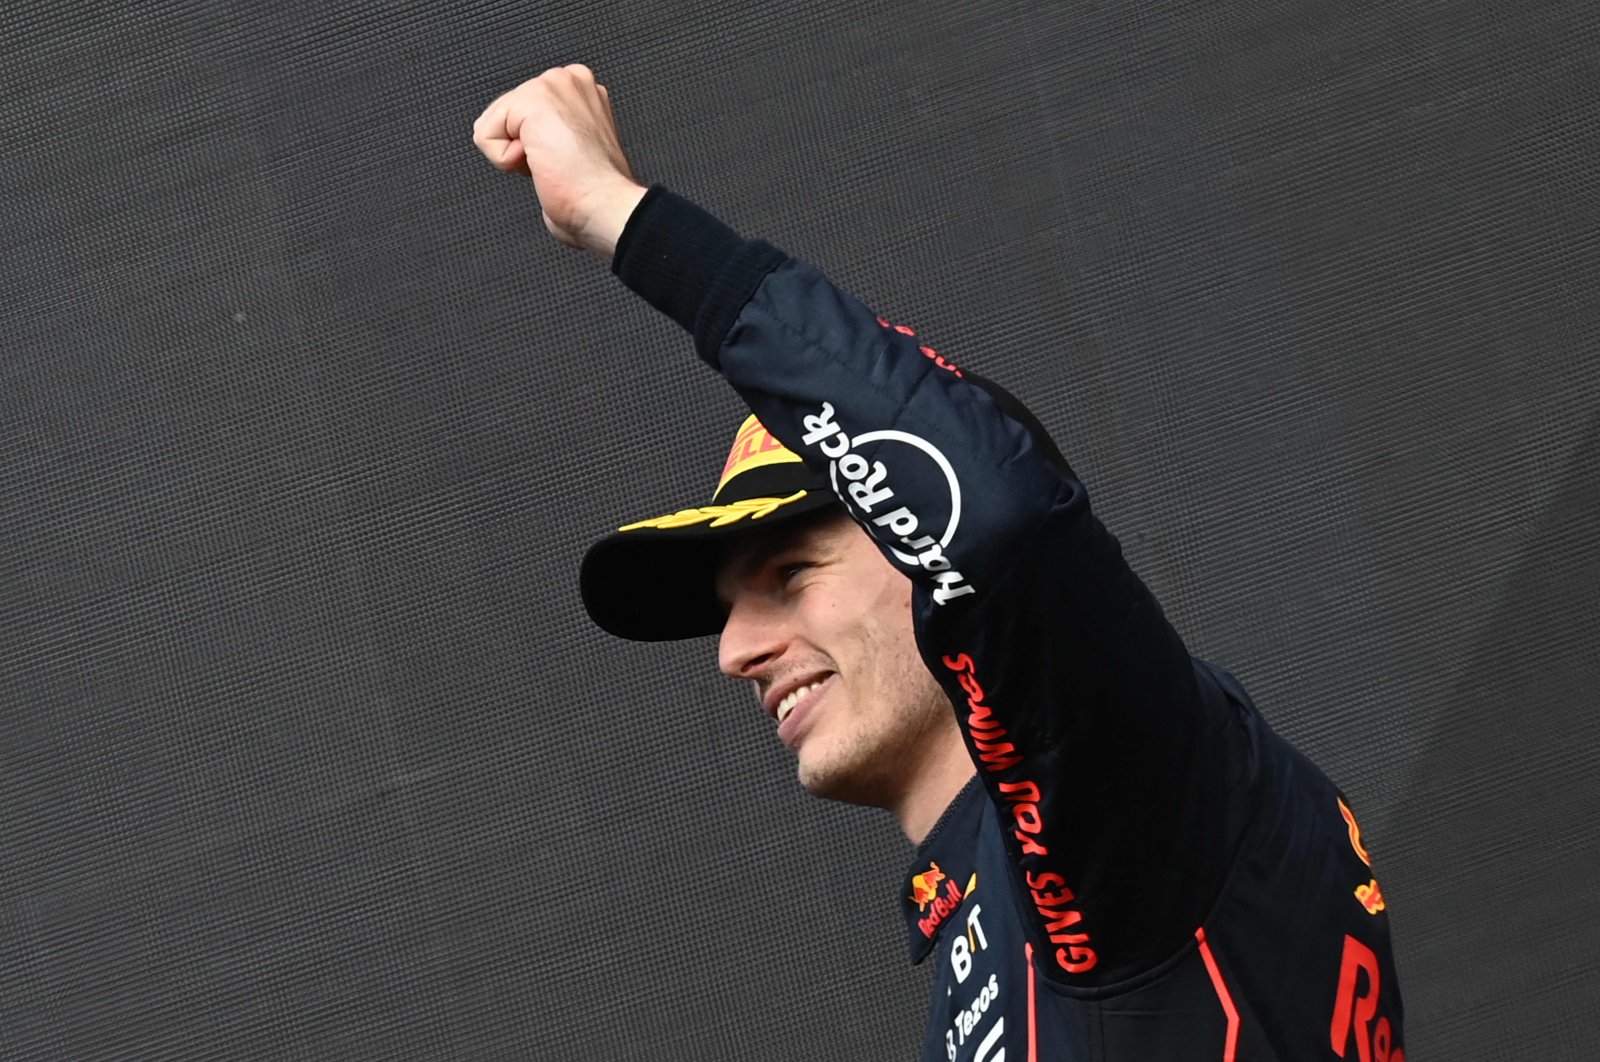 Red Bull&#039;s Max Verstappen celebrates after winning the F1 Belgian GP, Spa, Aug. 28, 2022. (AFP Photo)